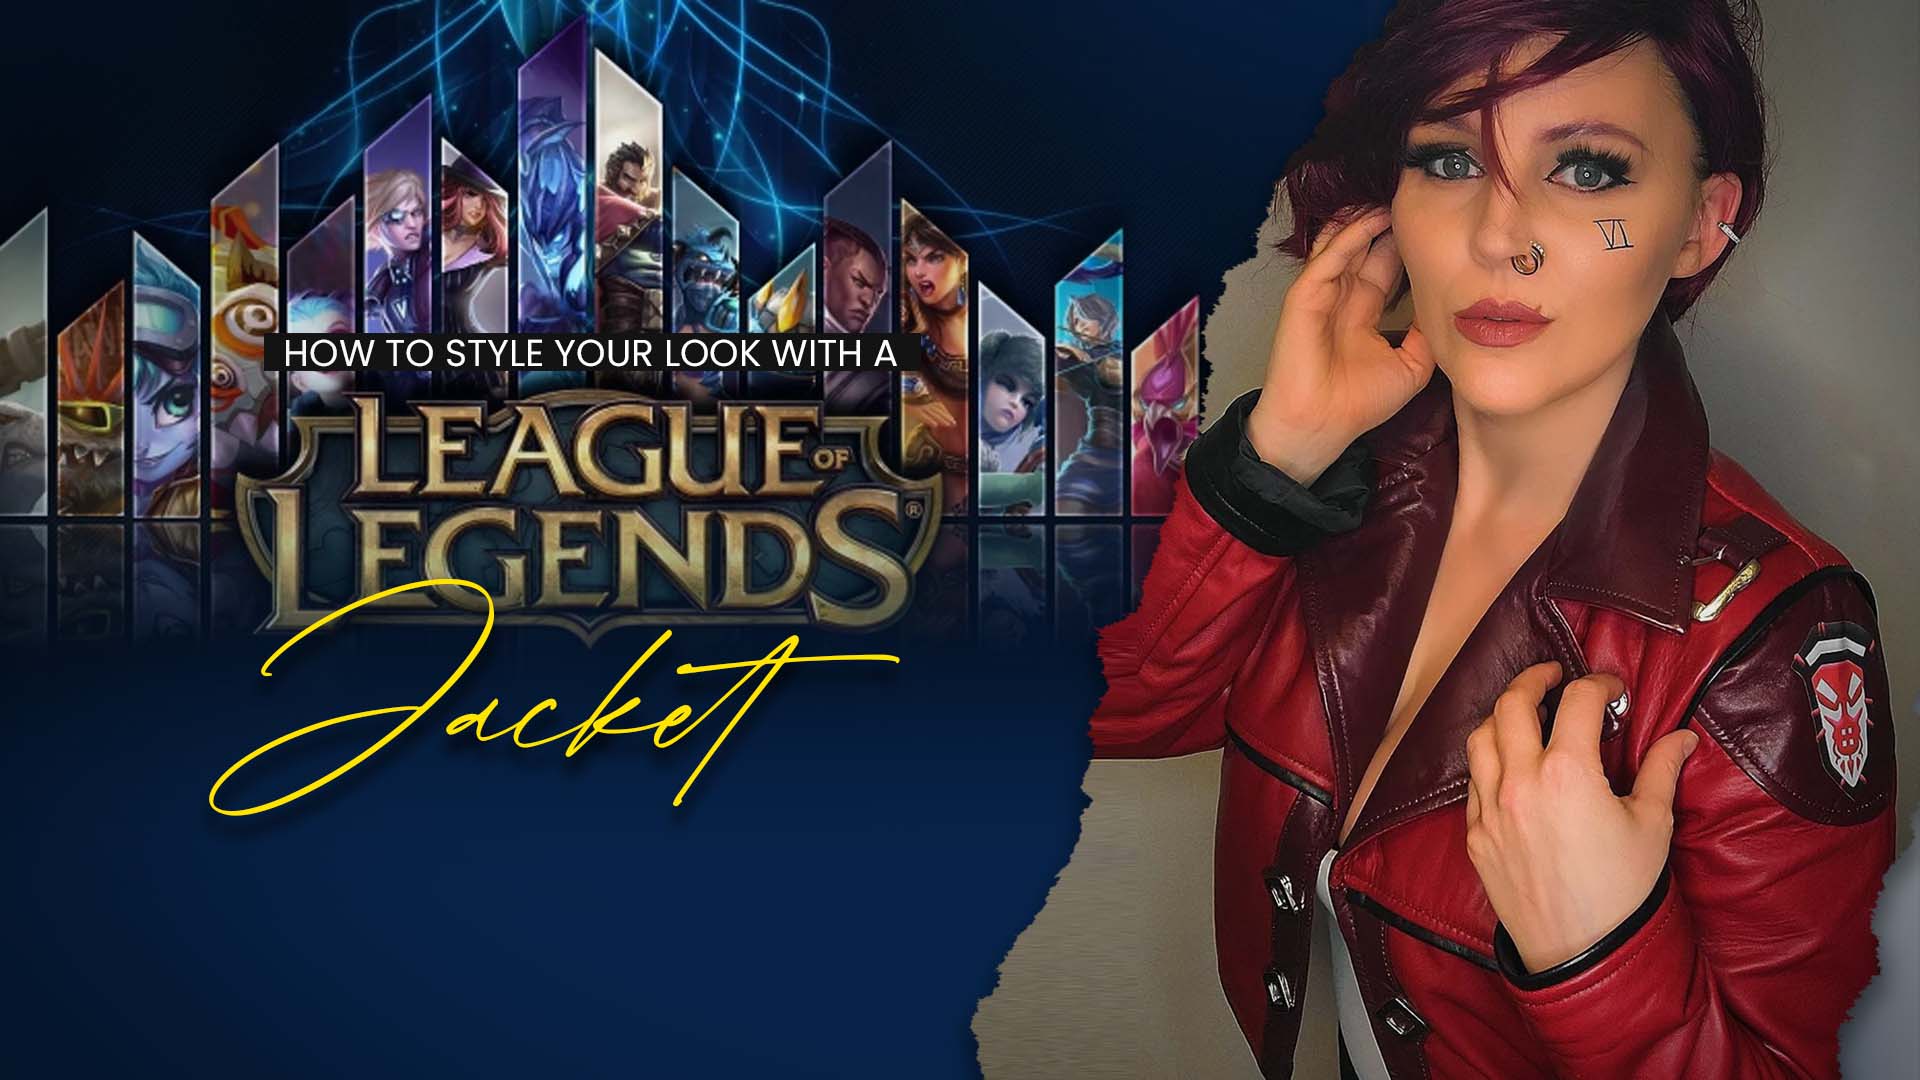 How To Style Your Look With A League Of Legends Jacket